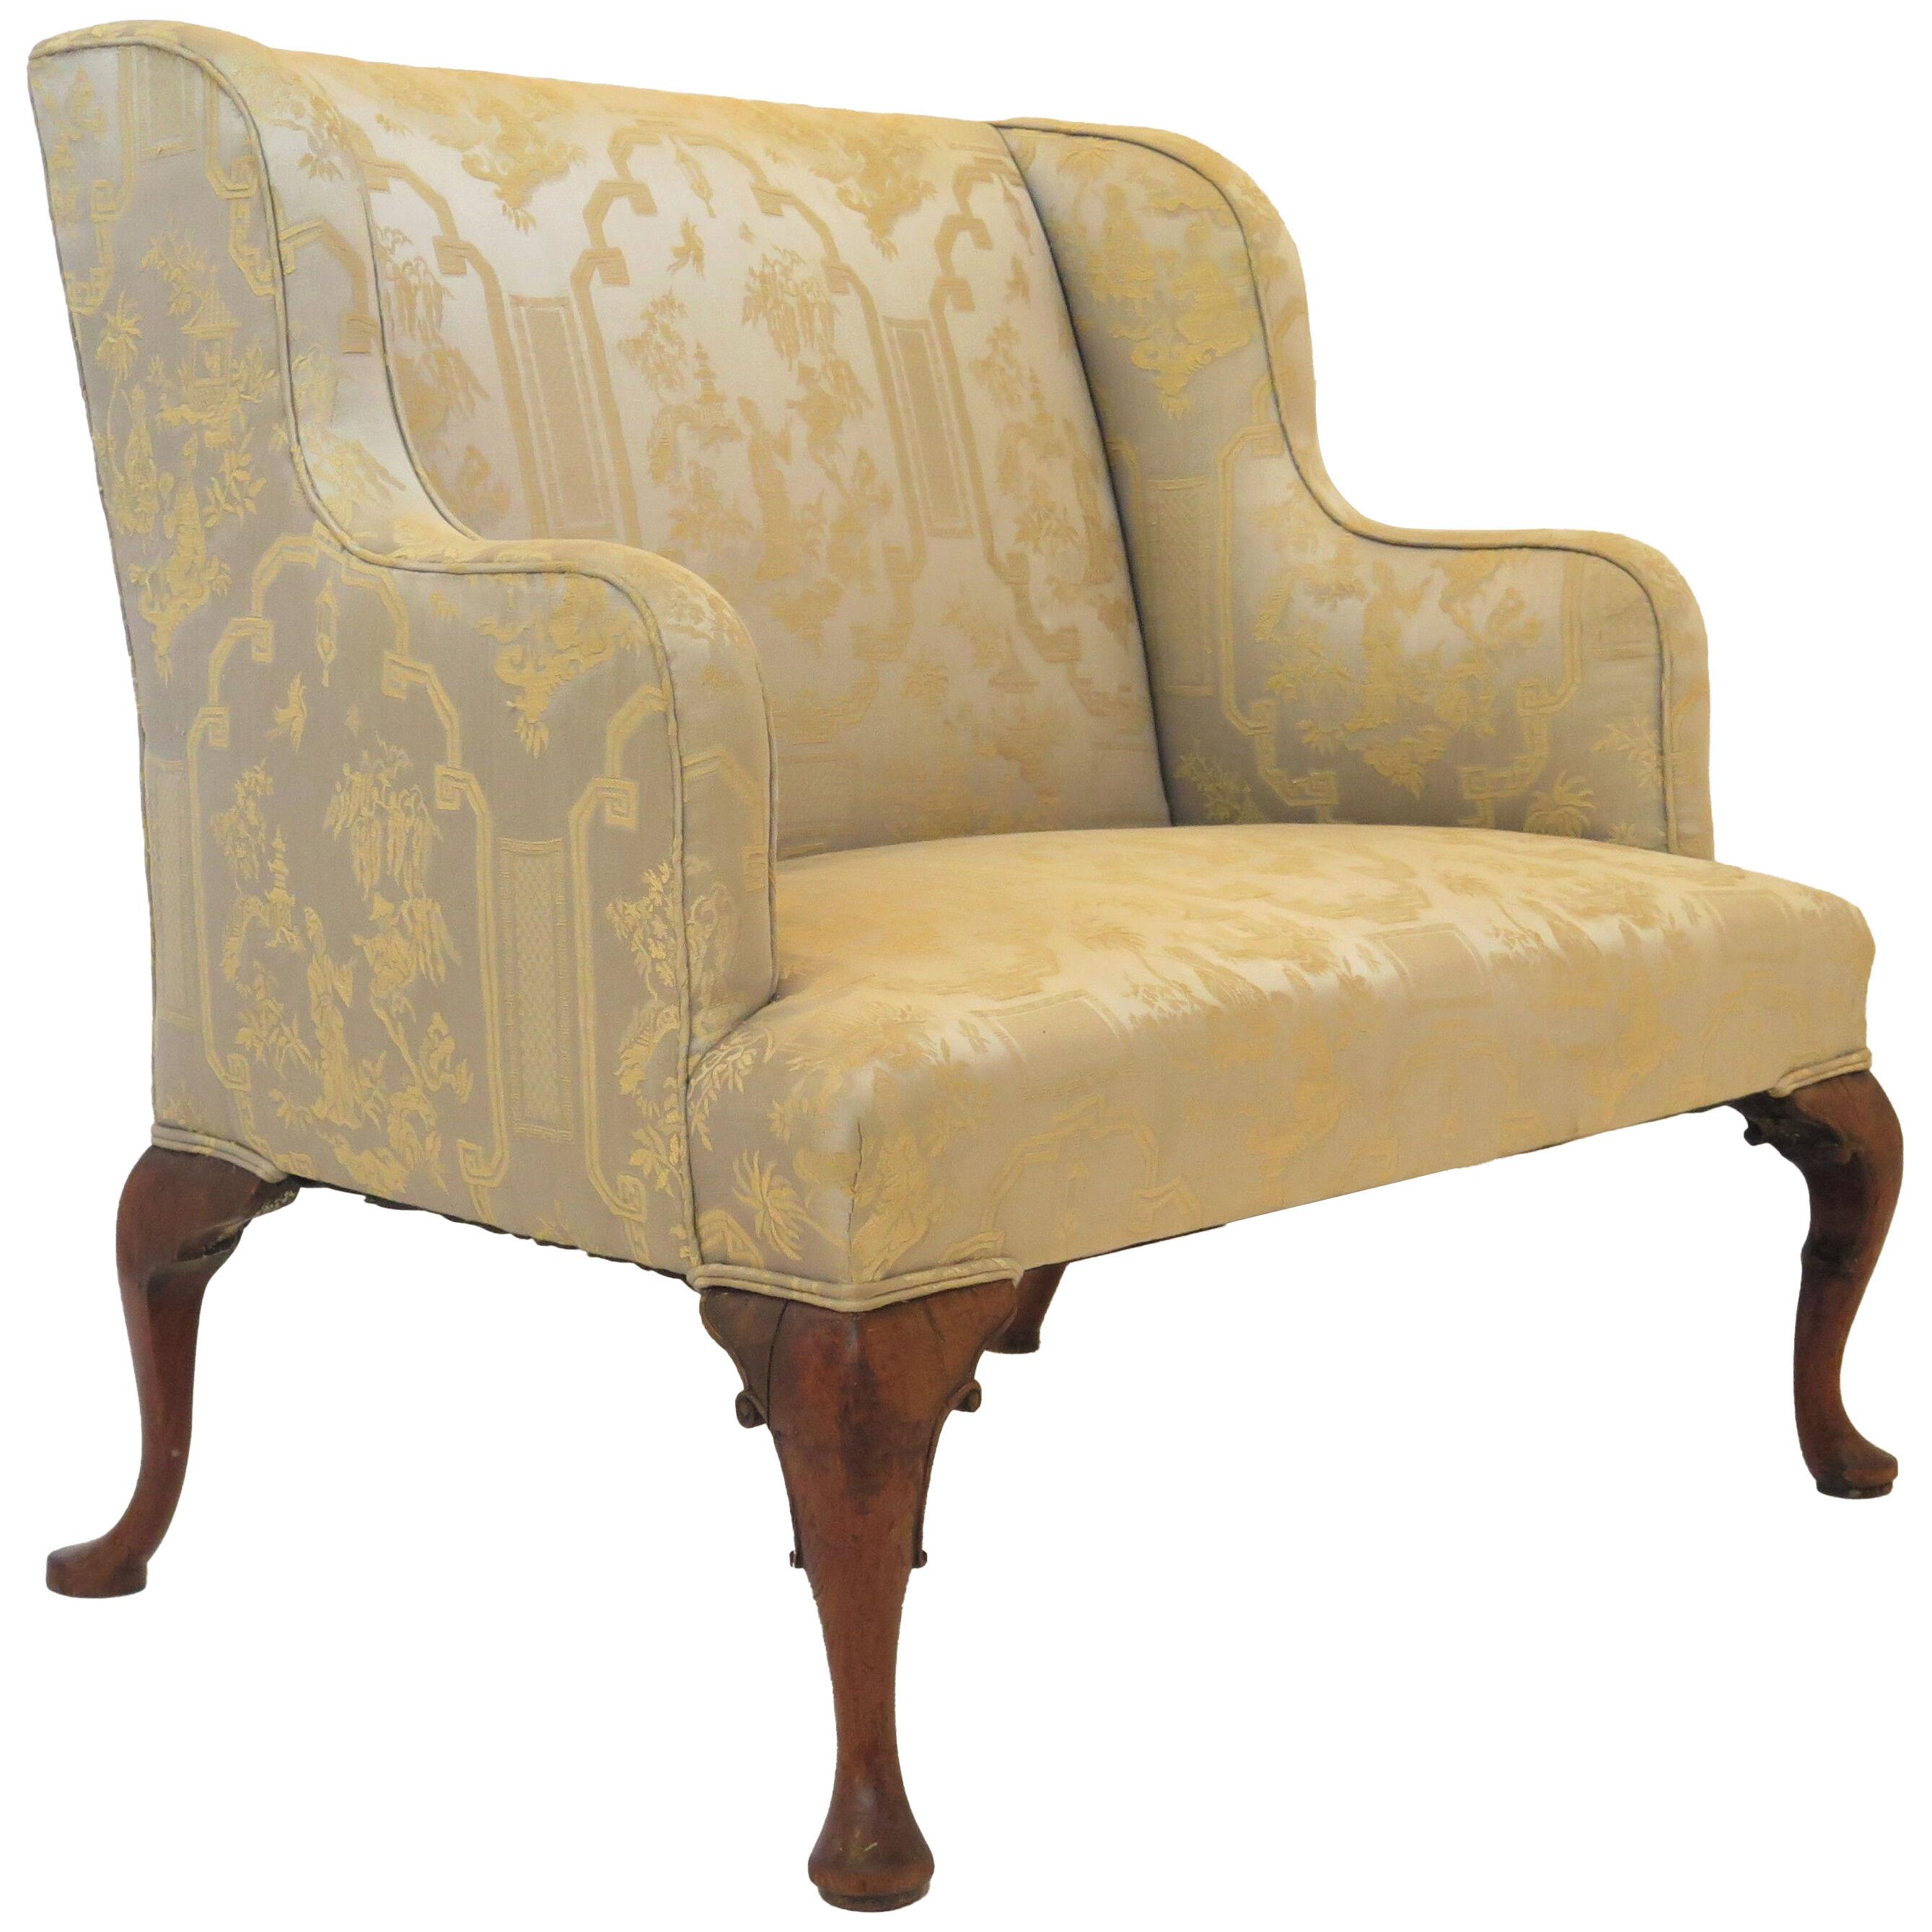 A George II Settee with Beautifully Shaped Mahogany Legs, Front and Back